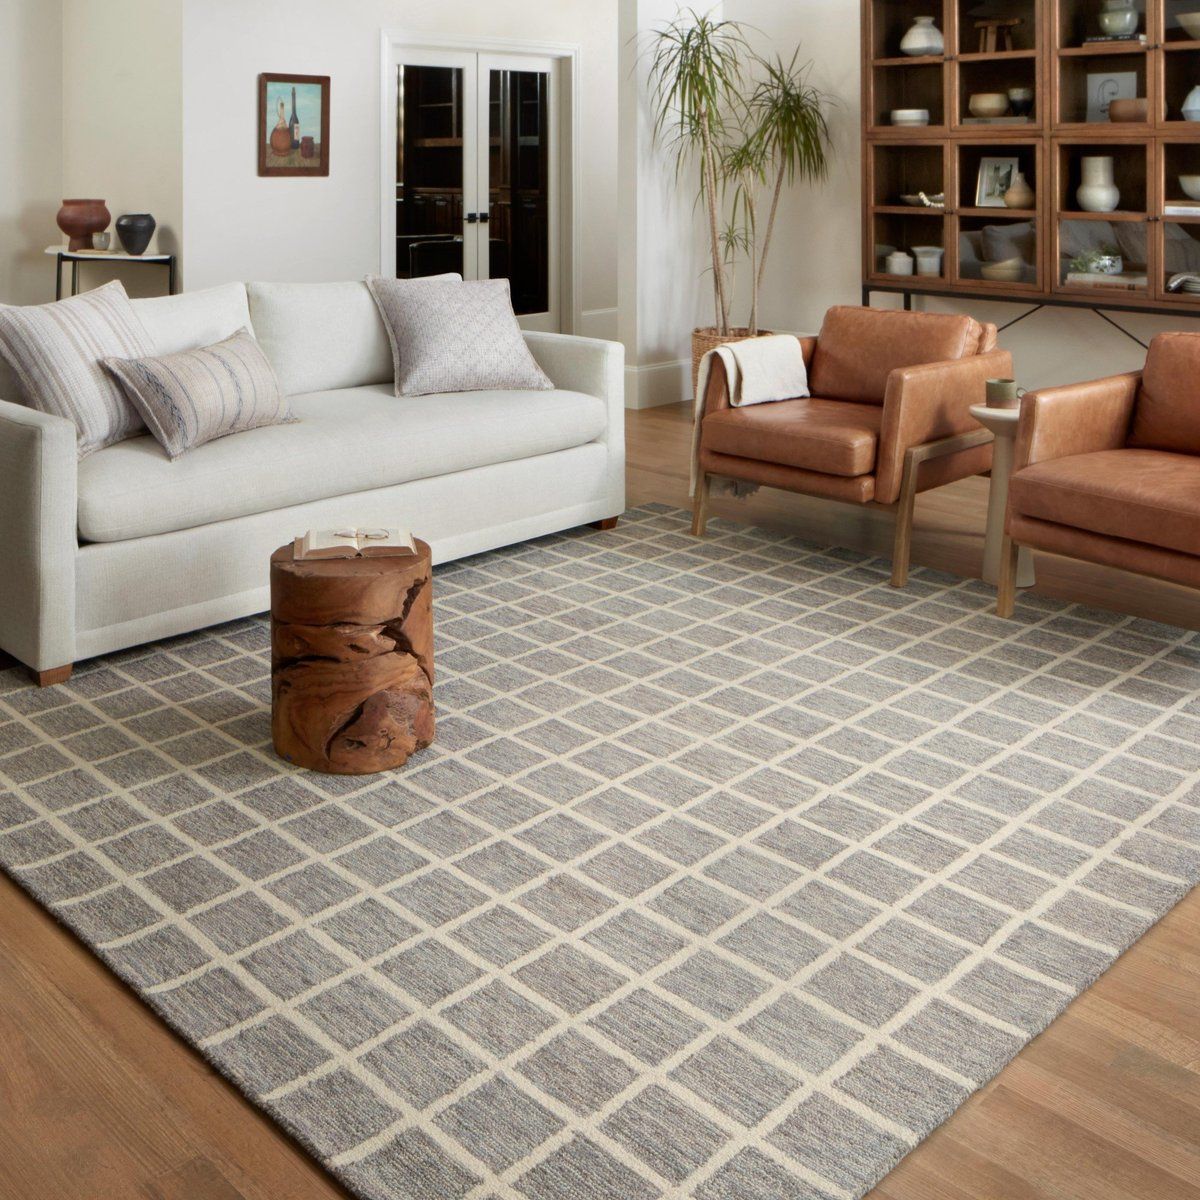 Chris Loves Julia X Loloi Polly Pol 05 Wool Modern Area Rugs | Rugs Direct Throughout Ivory Rugs (View 15 of 15)